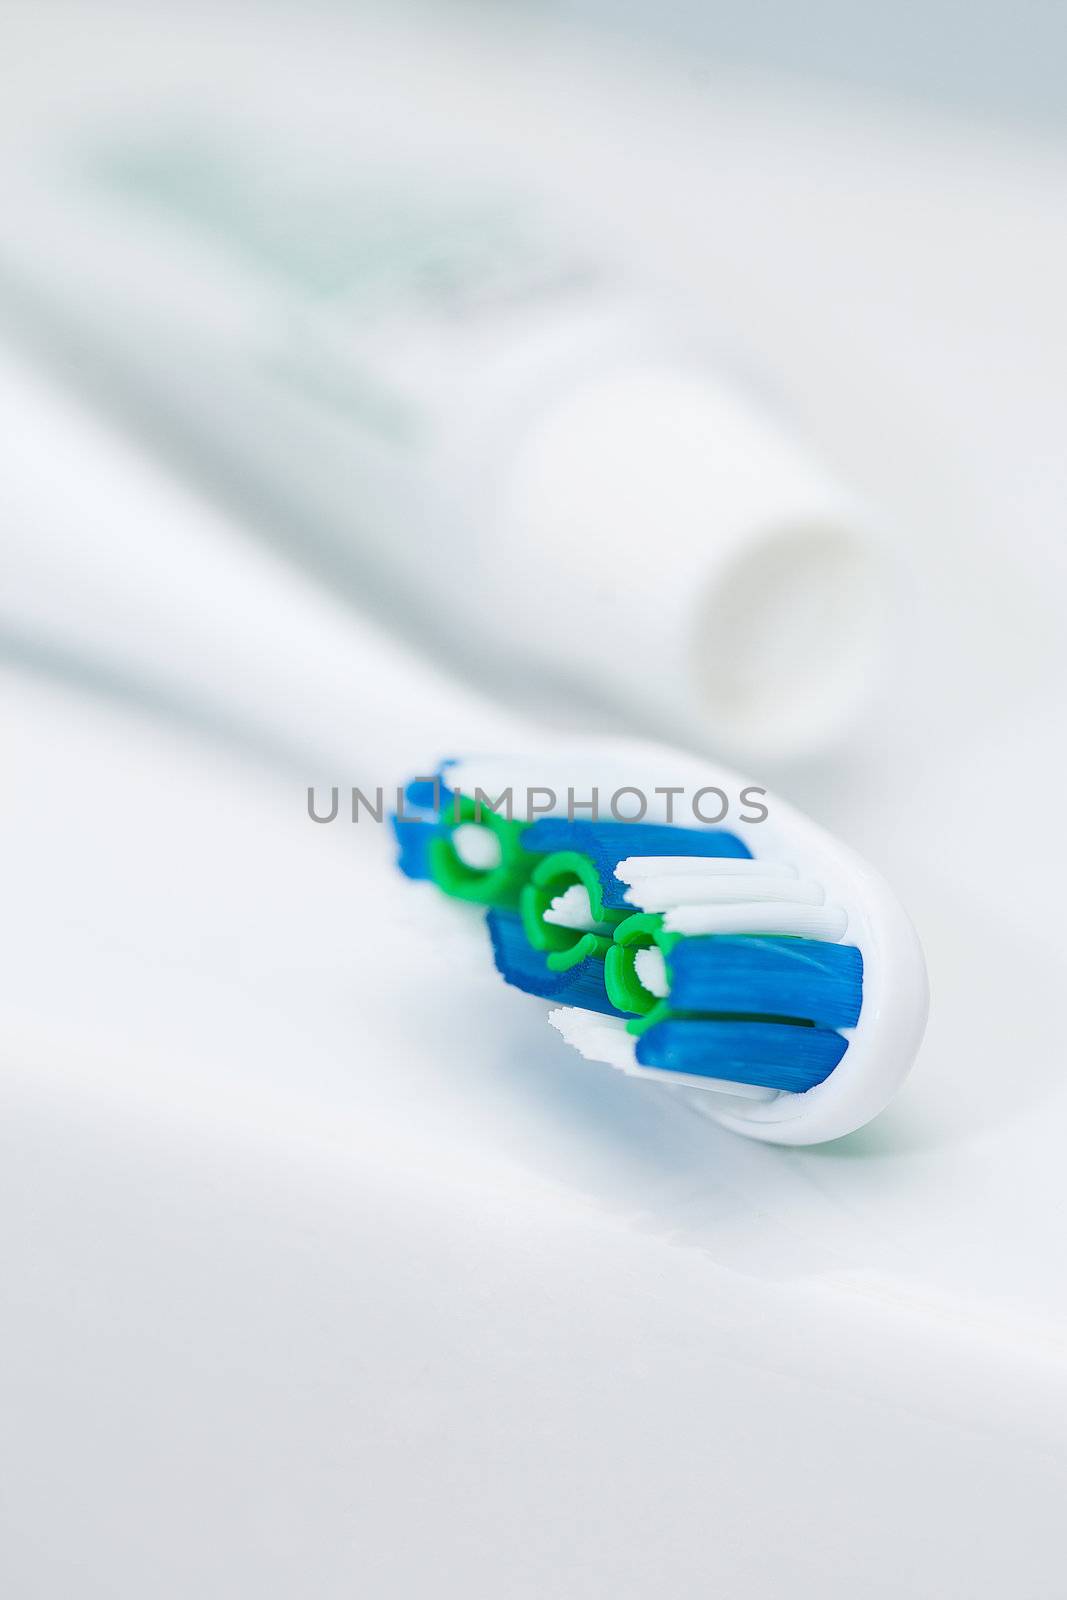 Closeup image of professional toothbrush and toothpaste in tube